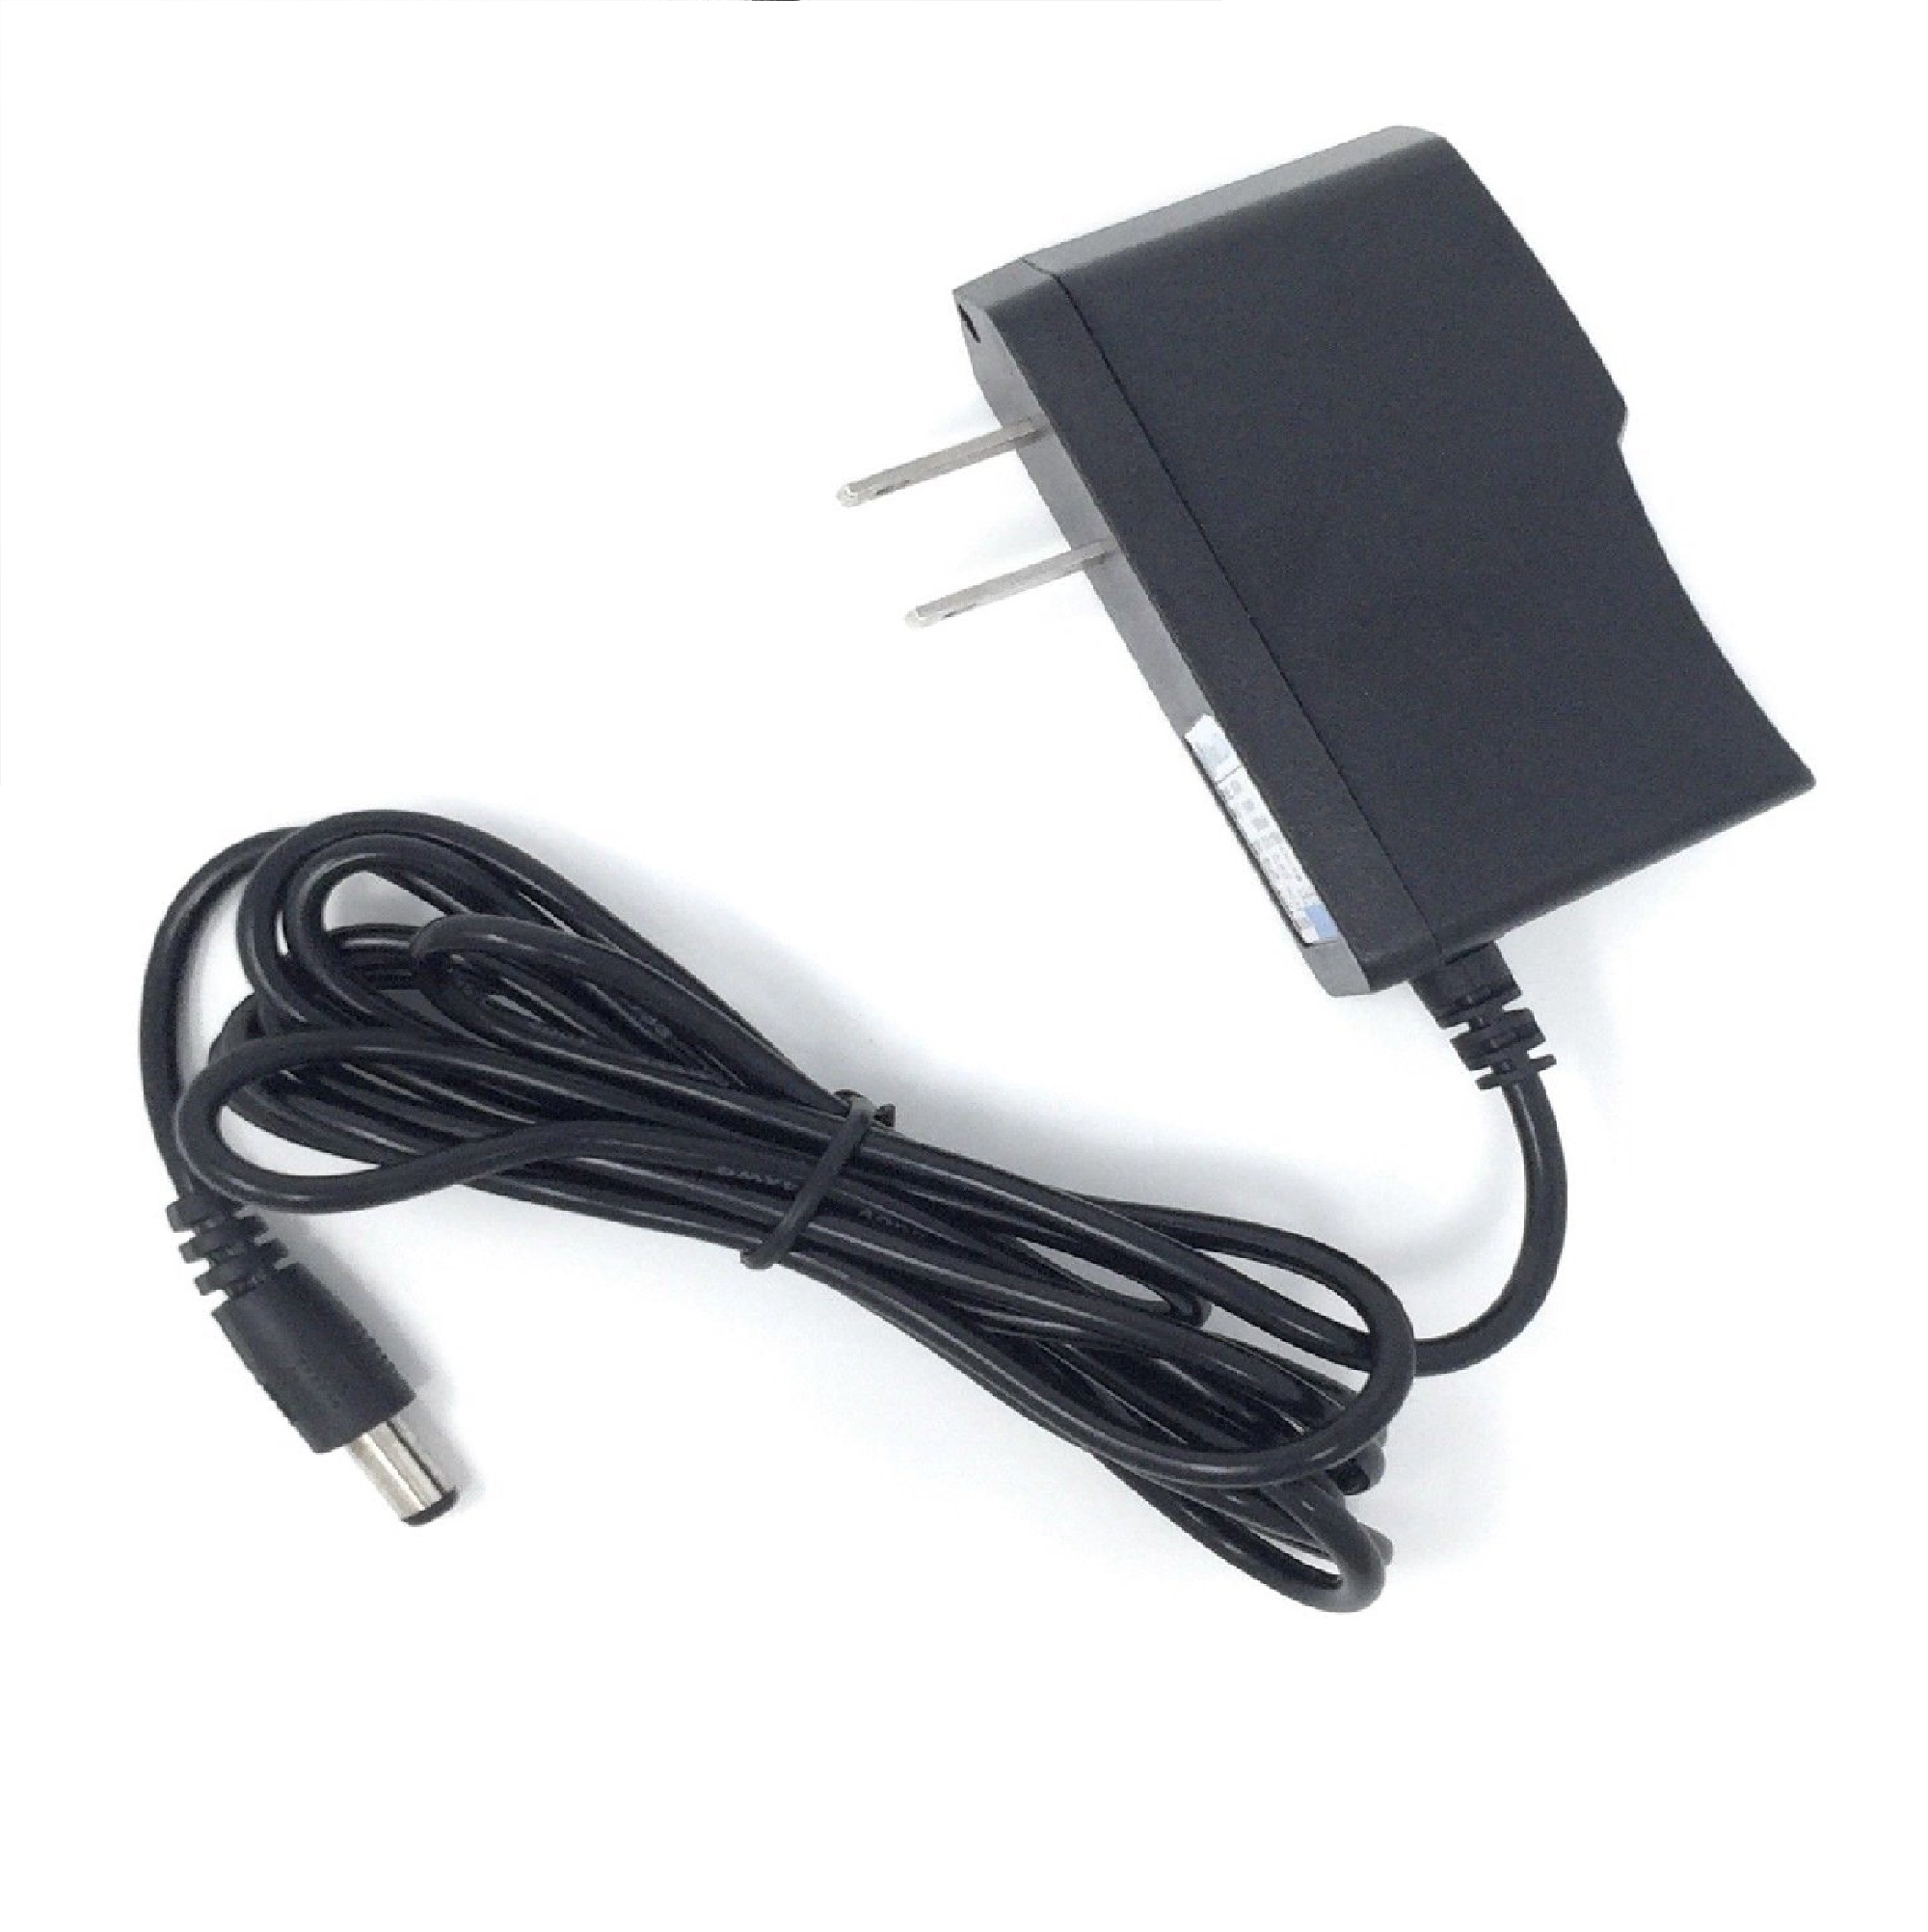 Sony VGN-N37MH AC Adapter Power Cord Supply Charger Cable DC adaptor poweradapter powersupply powercord powercharger 4 laptop notebook